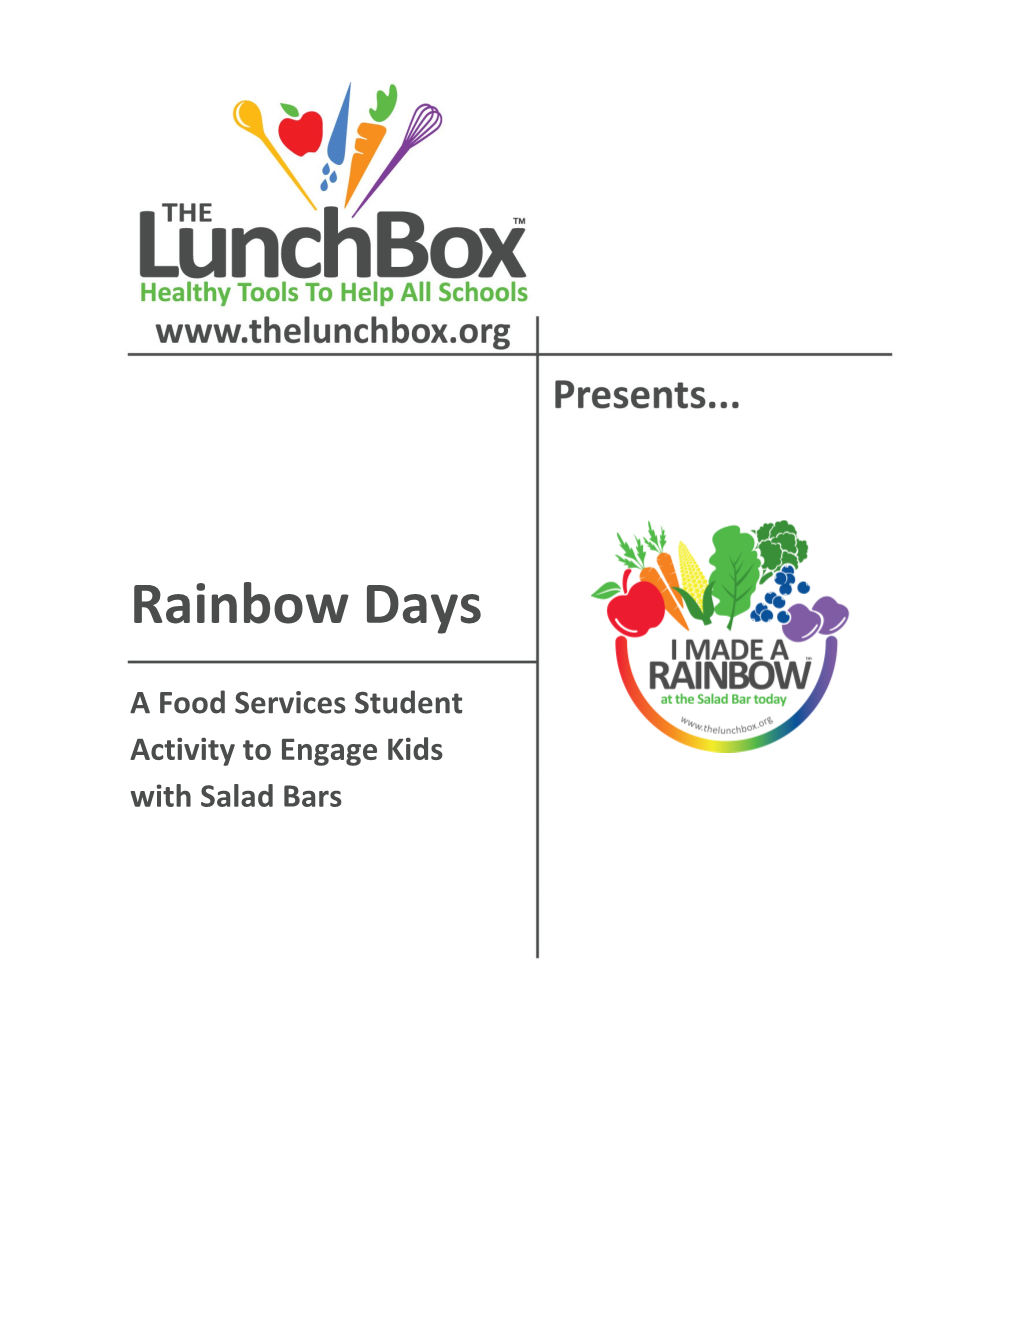 Rainbow Days: a Food Services Student Activity to Engage Kids with Salad Bars